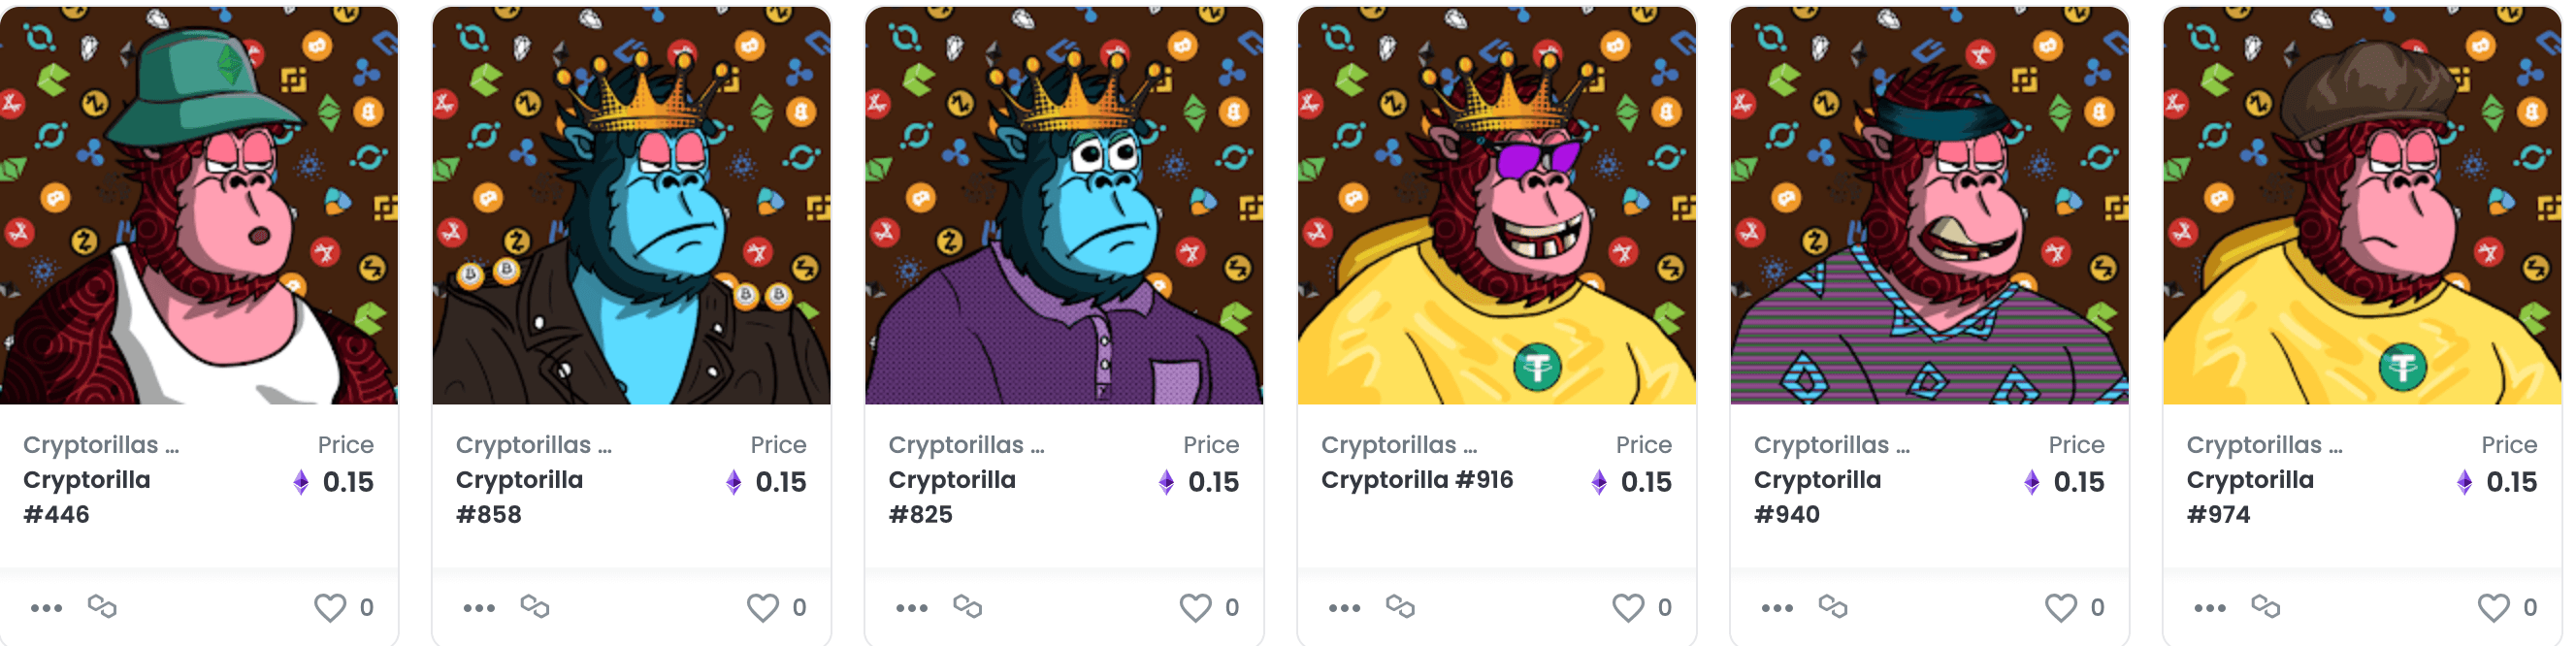 Cryptorillas to The Moon